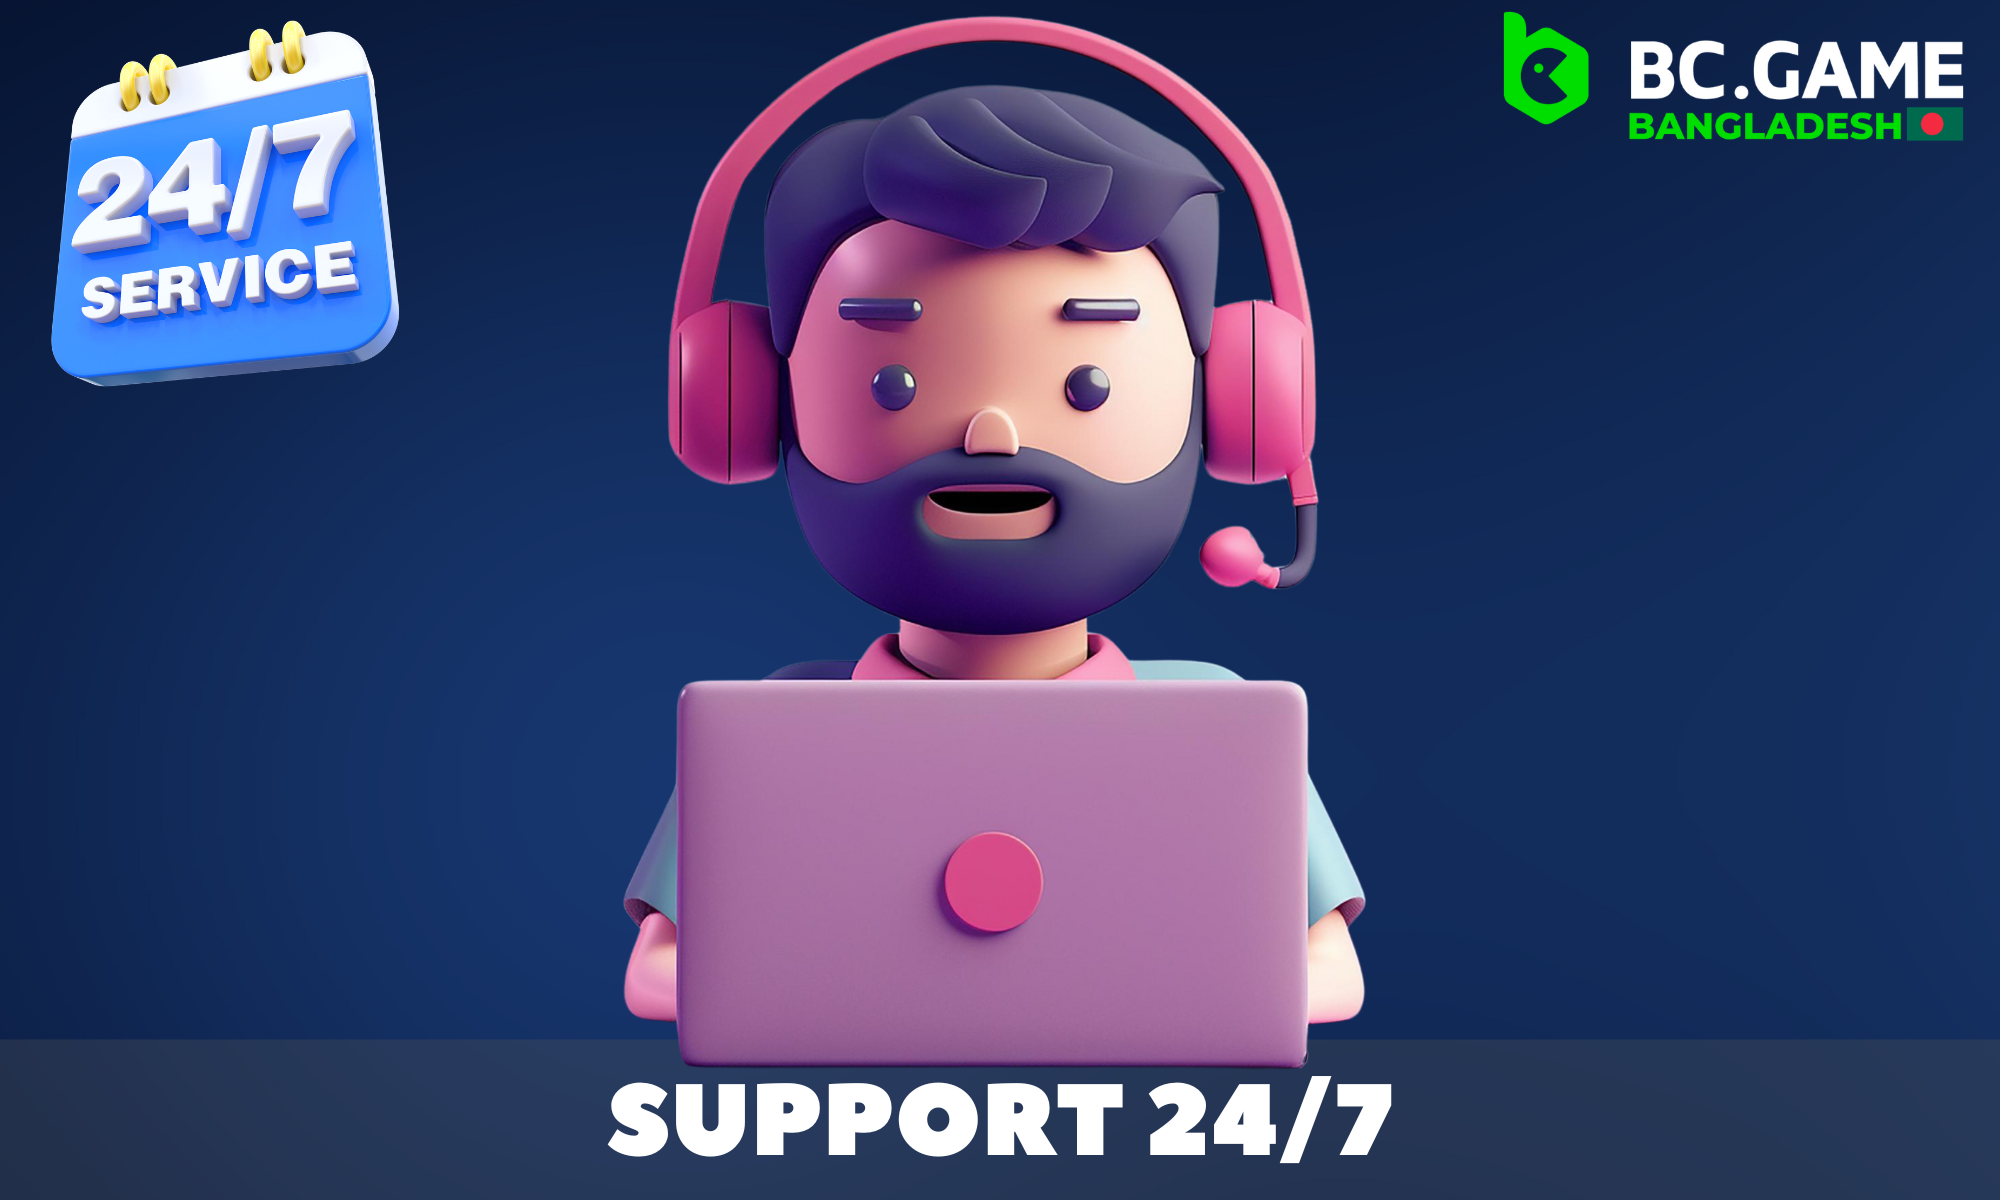 At BC Game, technical support for users is available 24/7